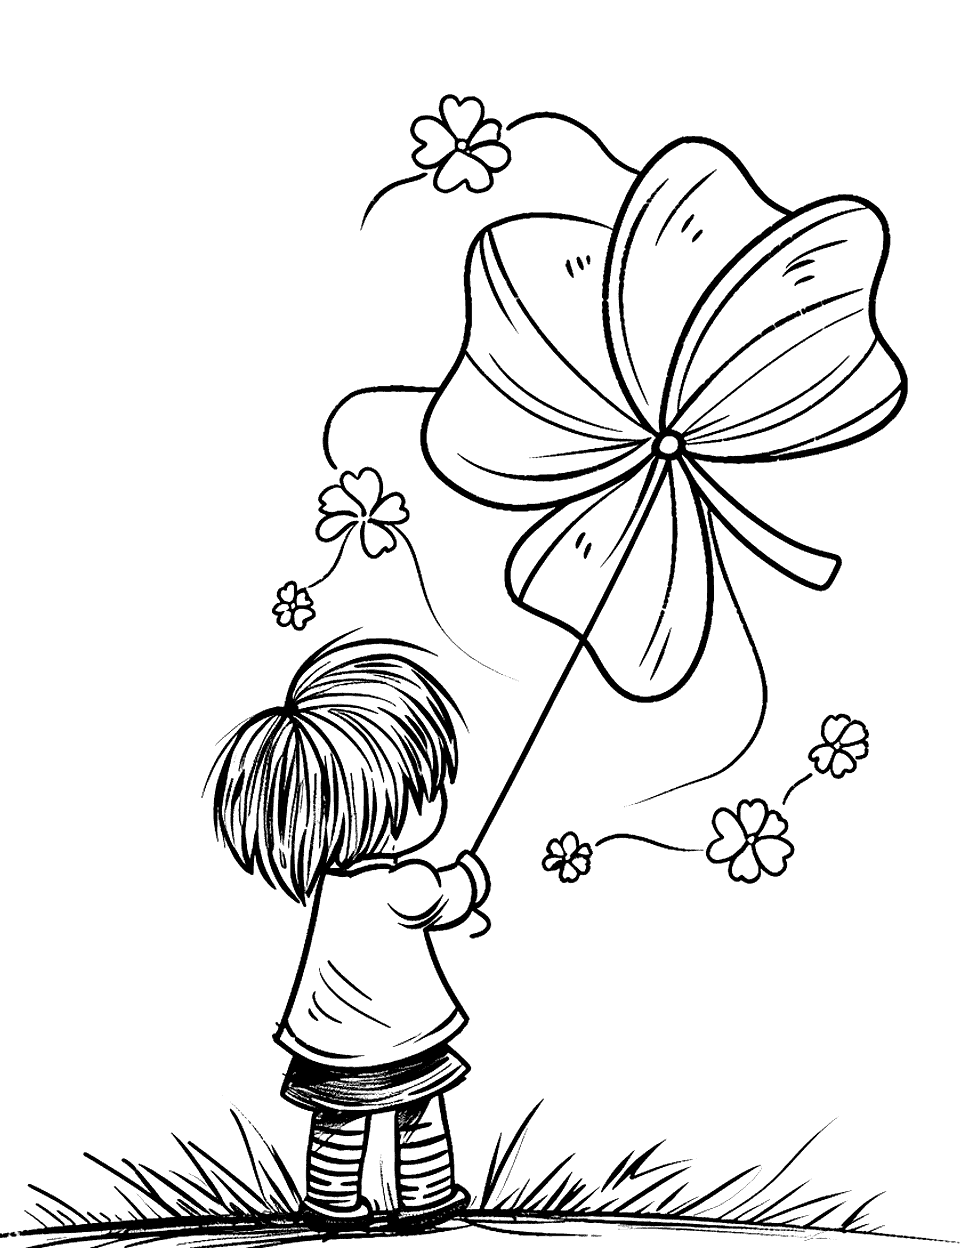 Shamrock Kite Flying on a Windy Day Coloring Page - A child flying a kite shaped like a shamrock on a breezy spring day.